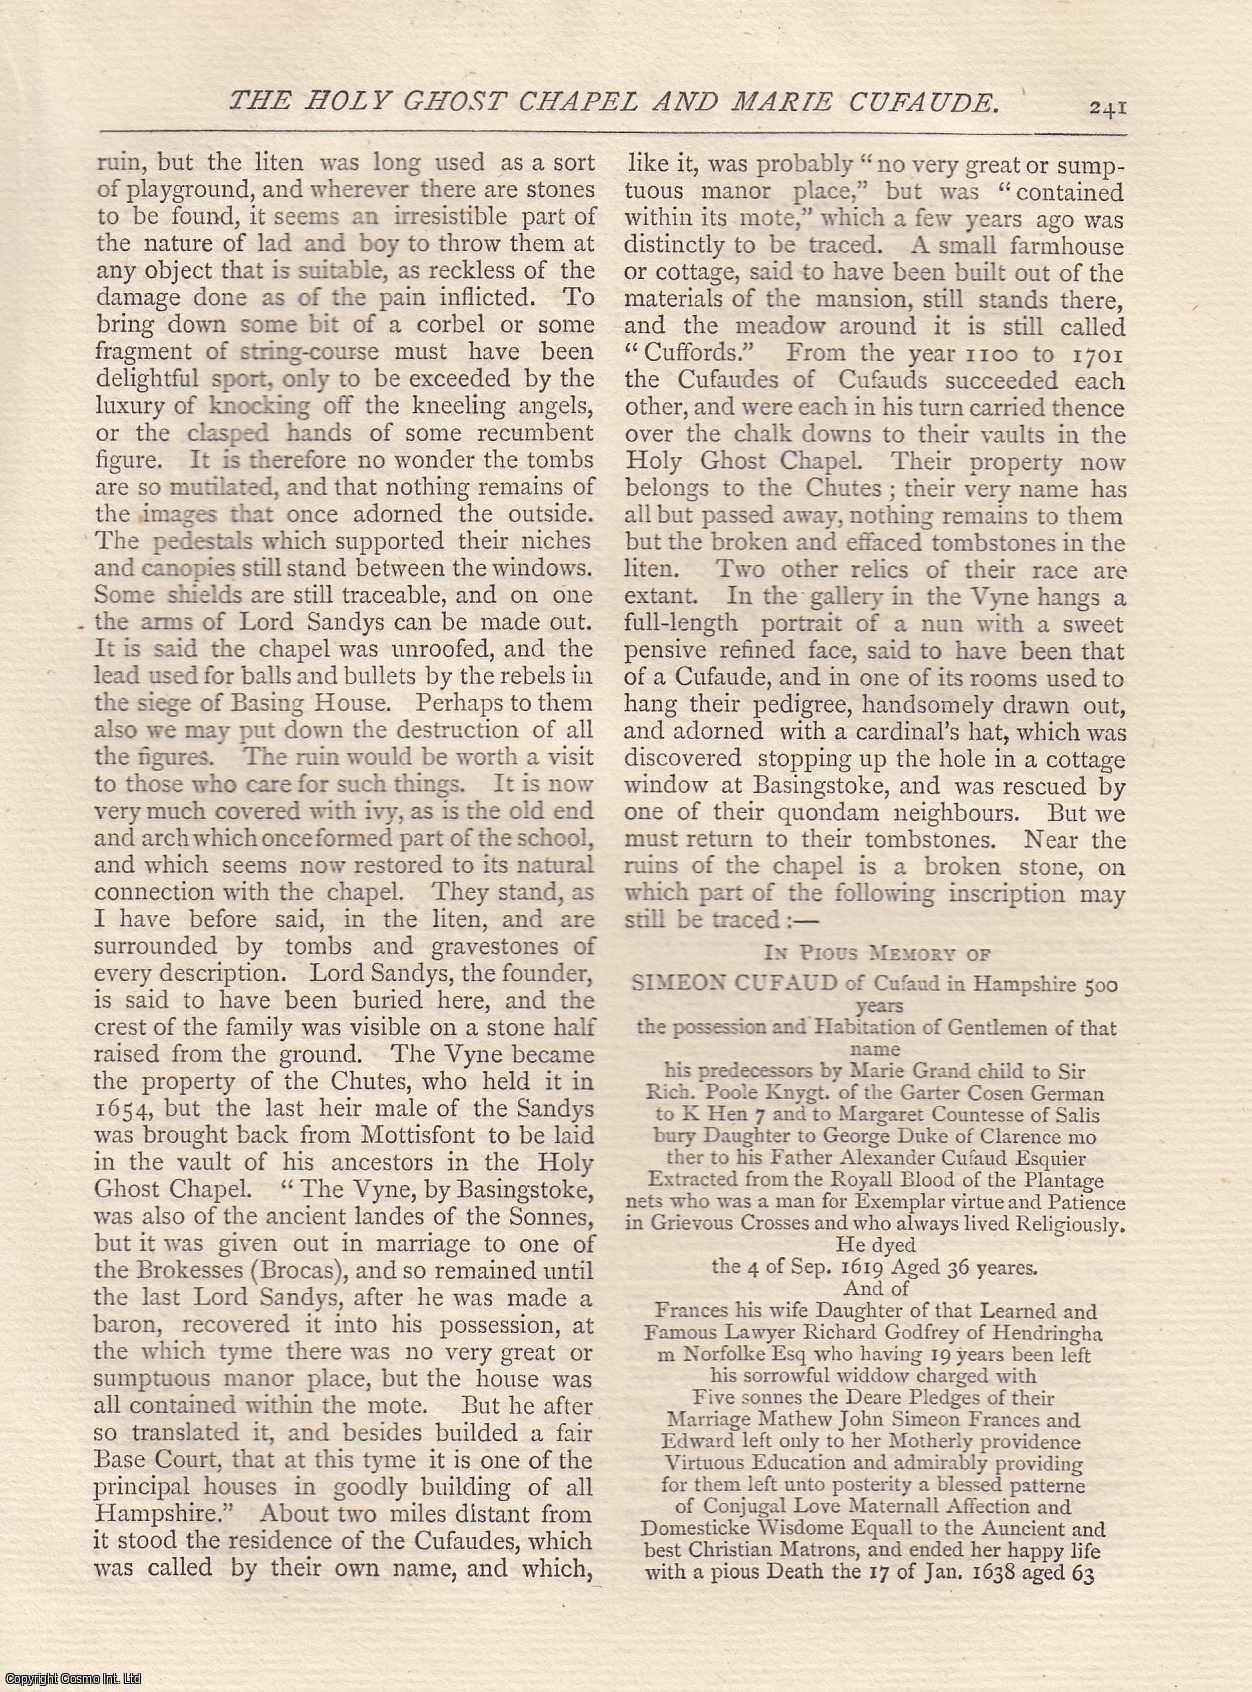 F. C. L. - The Holy Ghost Chapel and Marie Cufaud. An original article from The Antiquary Magazine, 1882.